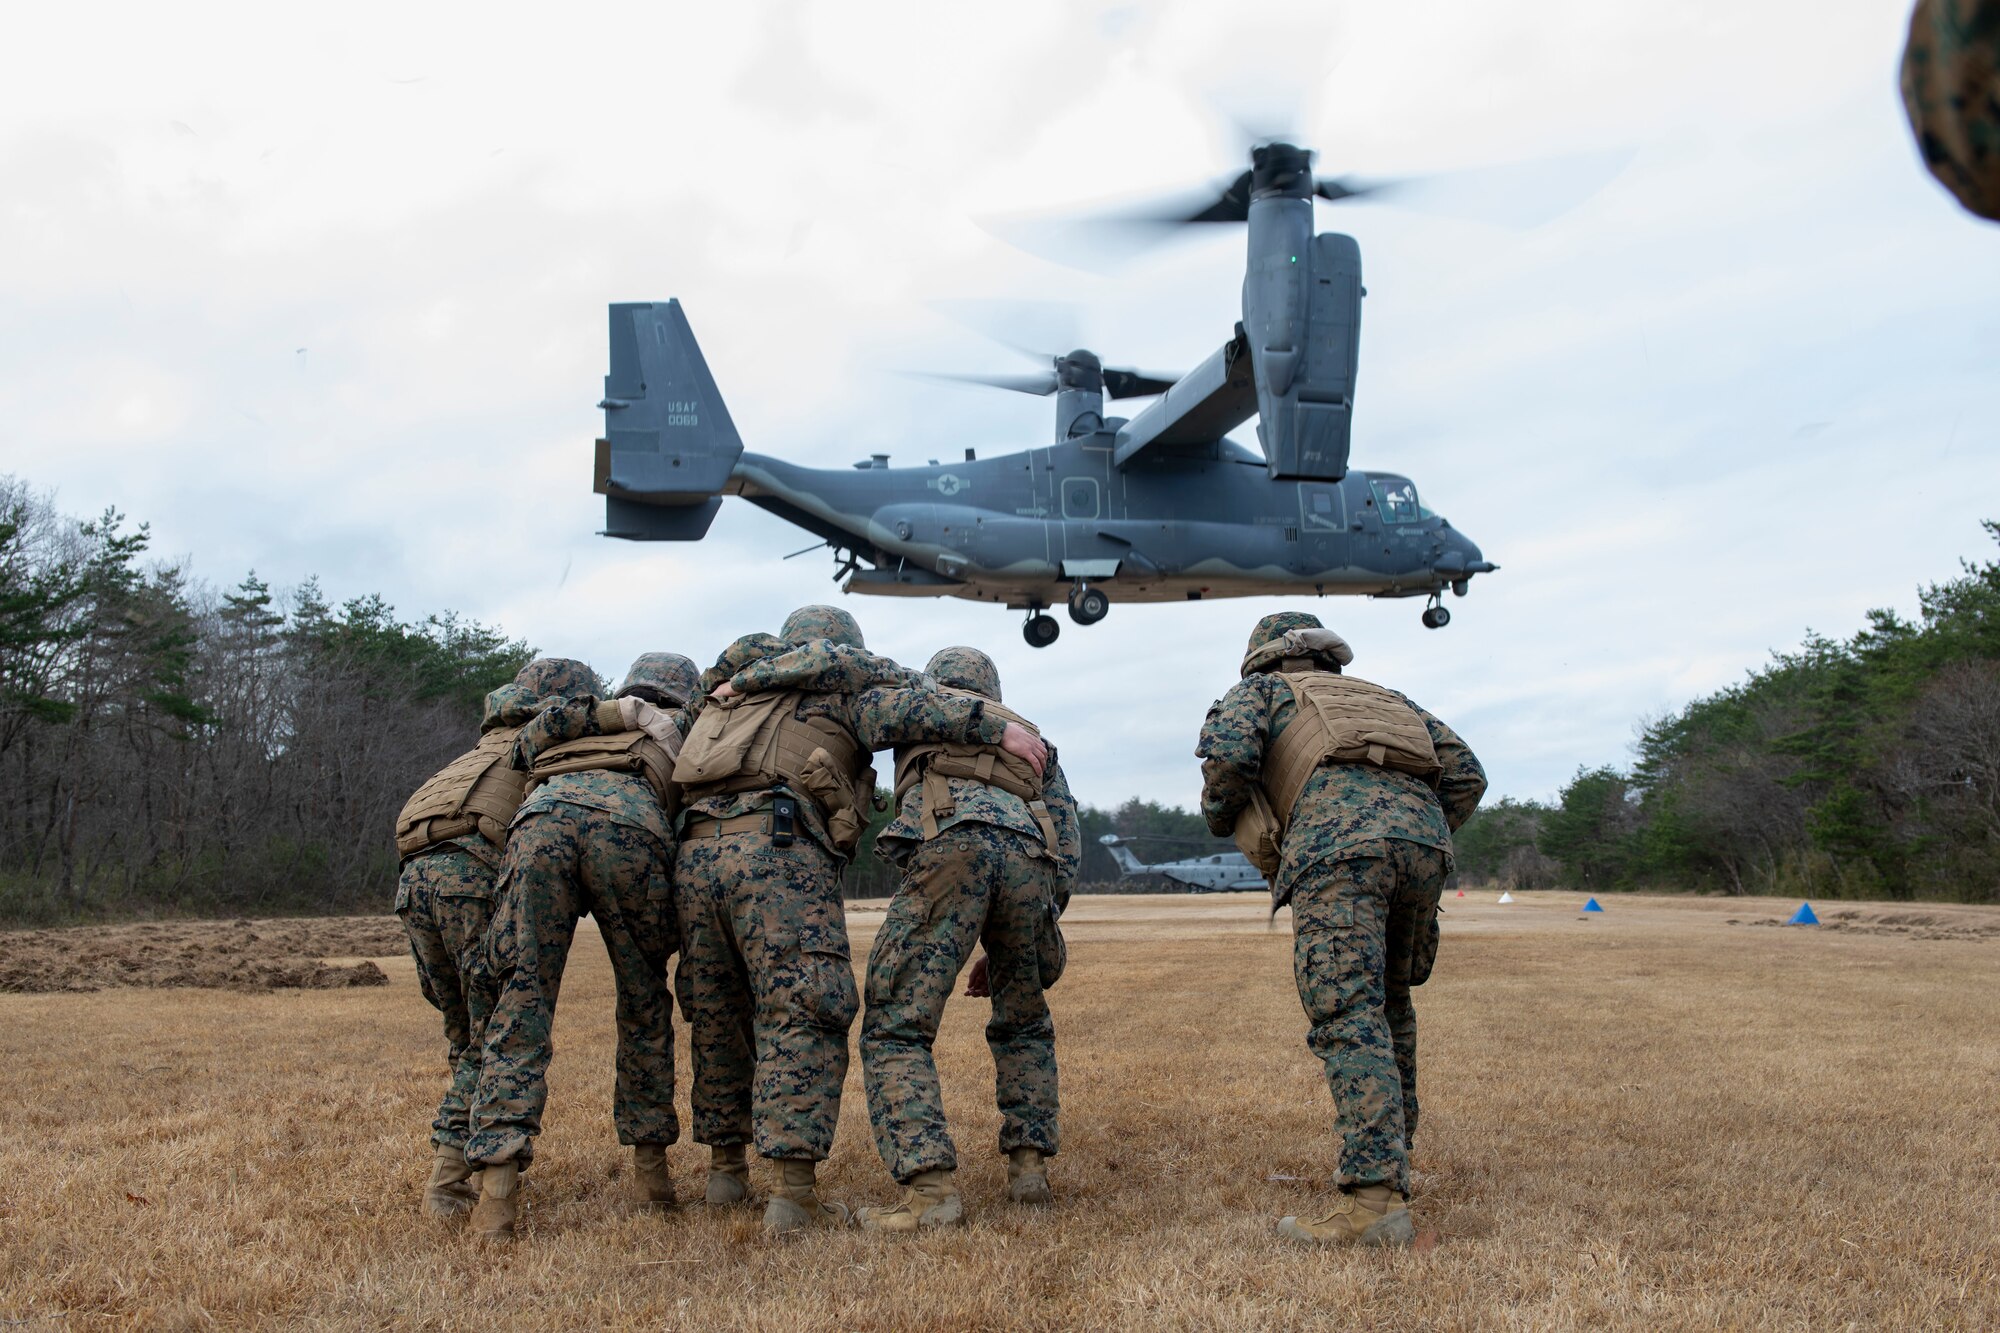 Five U.S. Marines huddle together against the wind generated by a helicopter taking off.